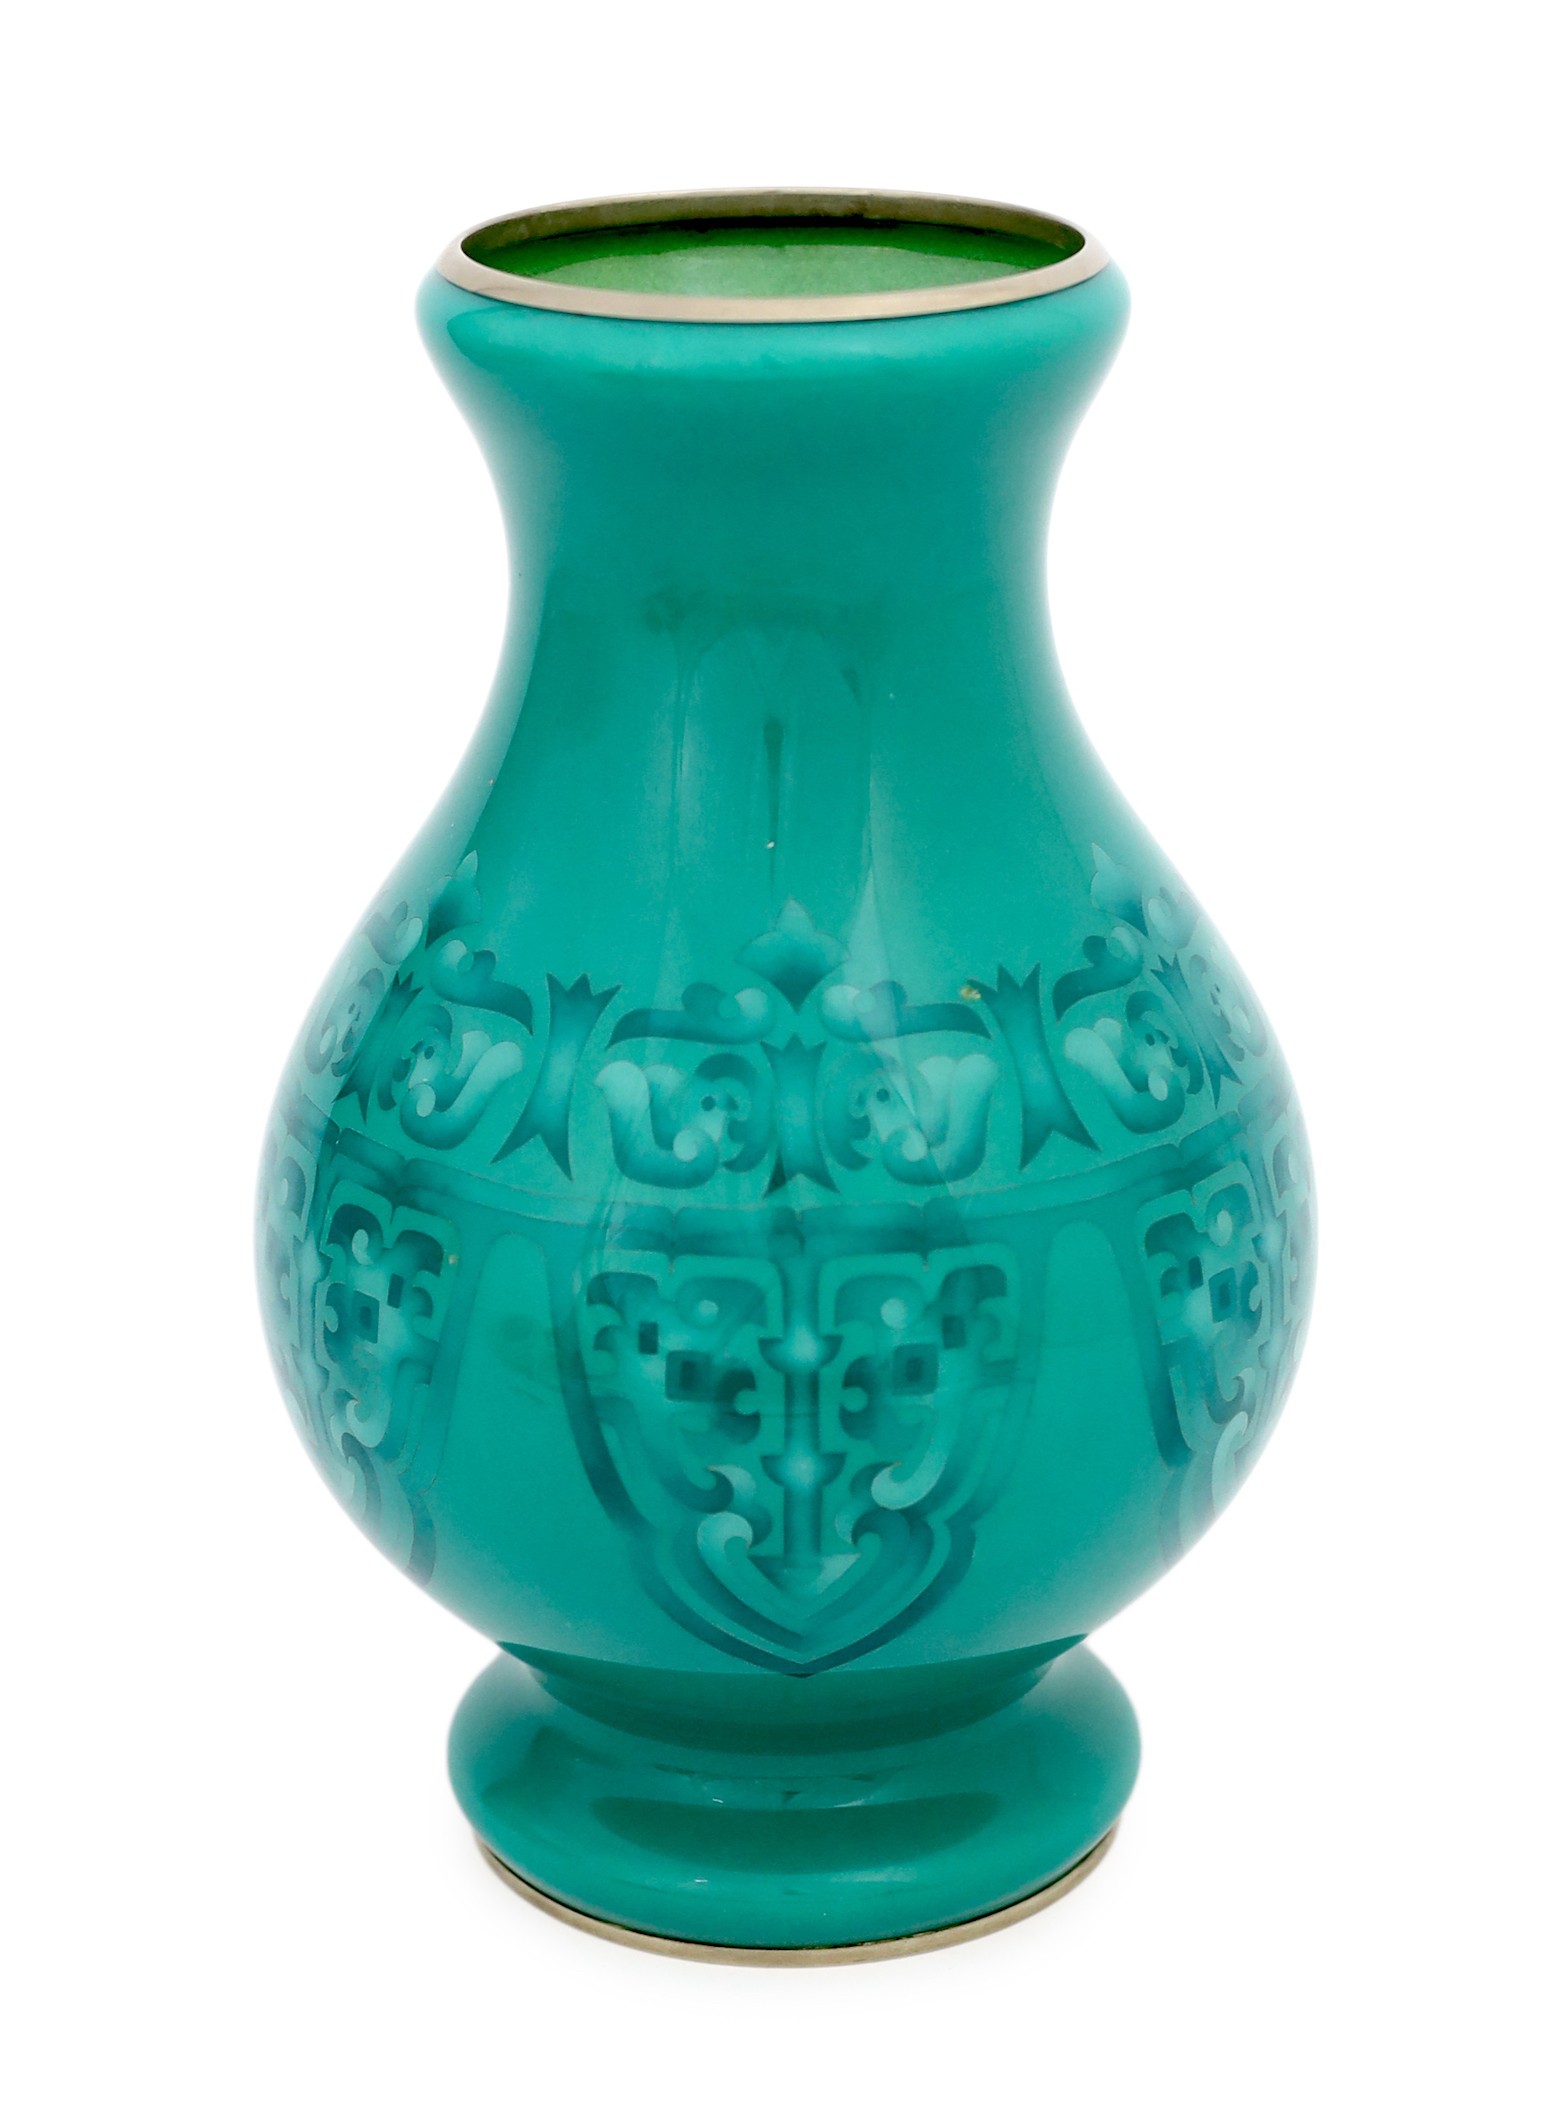 A Japanese silver wire cloisonné enamel baluster vase, by Ando, mid 20th century, 26cm high